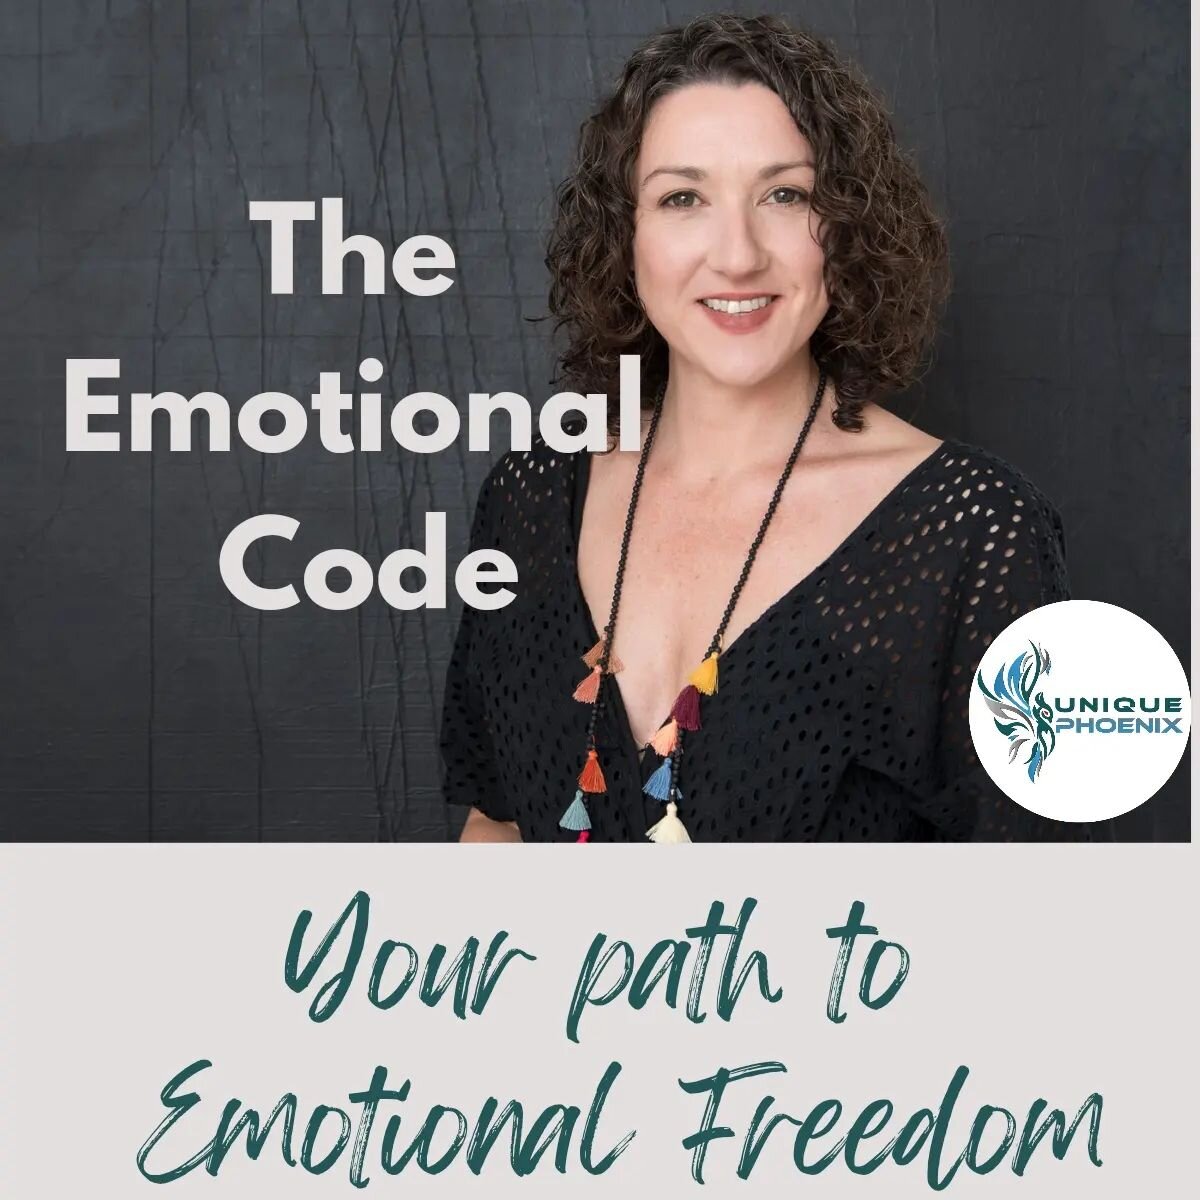 Every single person on the planet has them.

Every moment of the day you experience life with them and through them.

What if you had a road map to make life simpler with them?
Through the online course I created you start to visit with your feelings